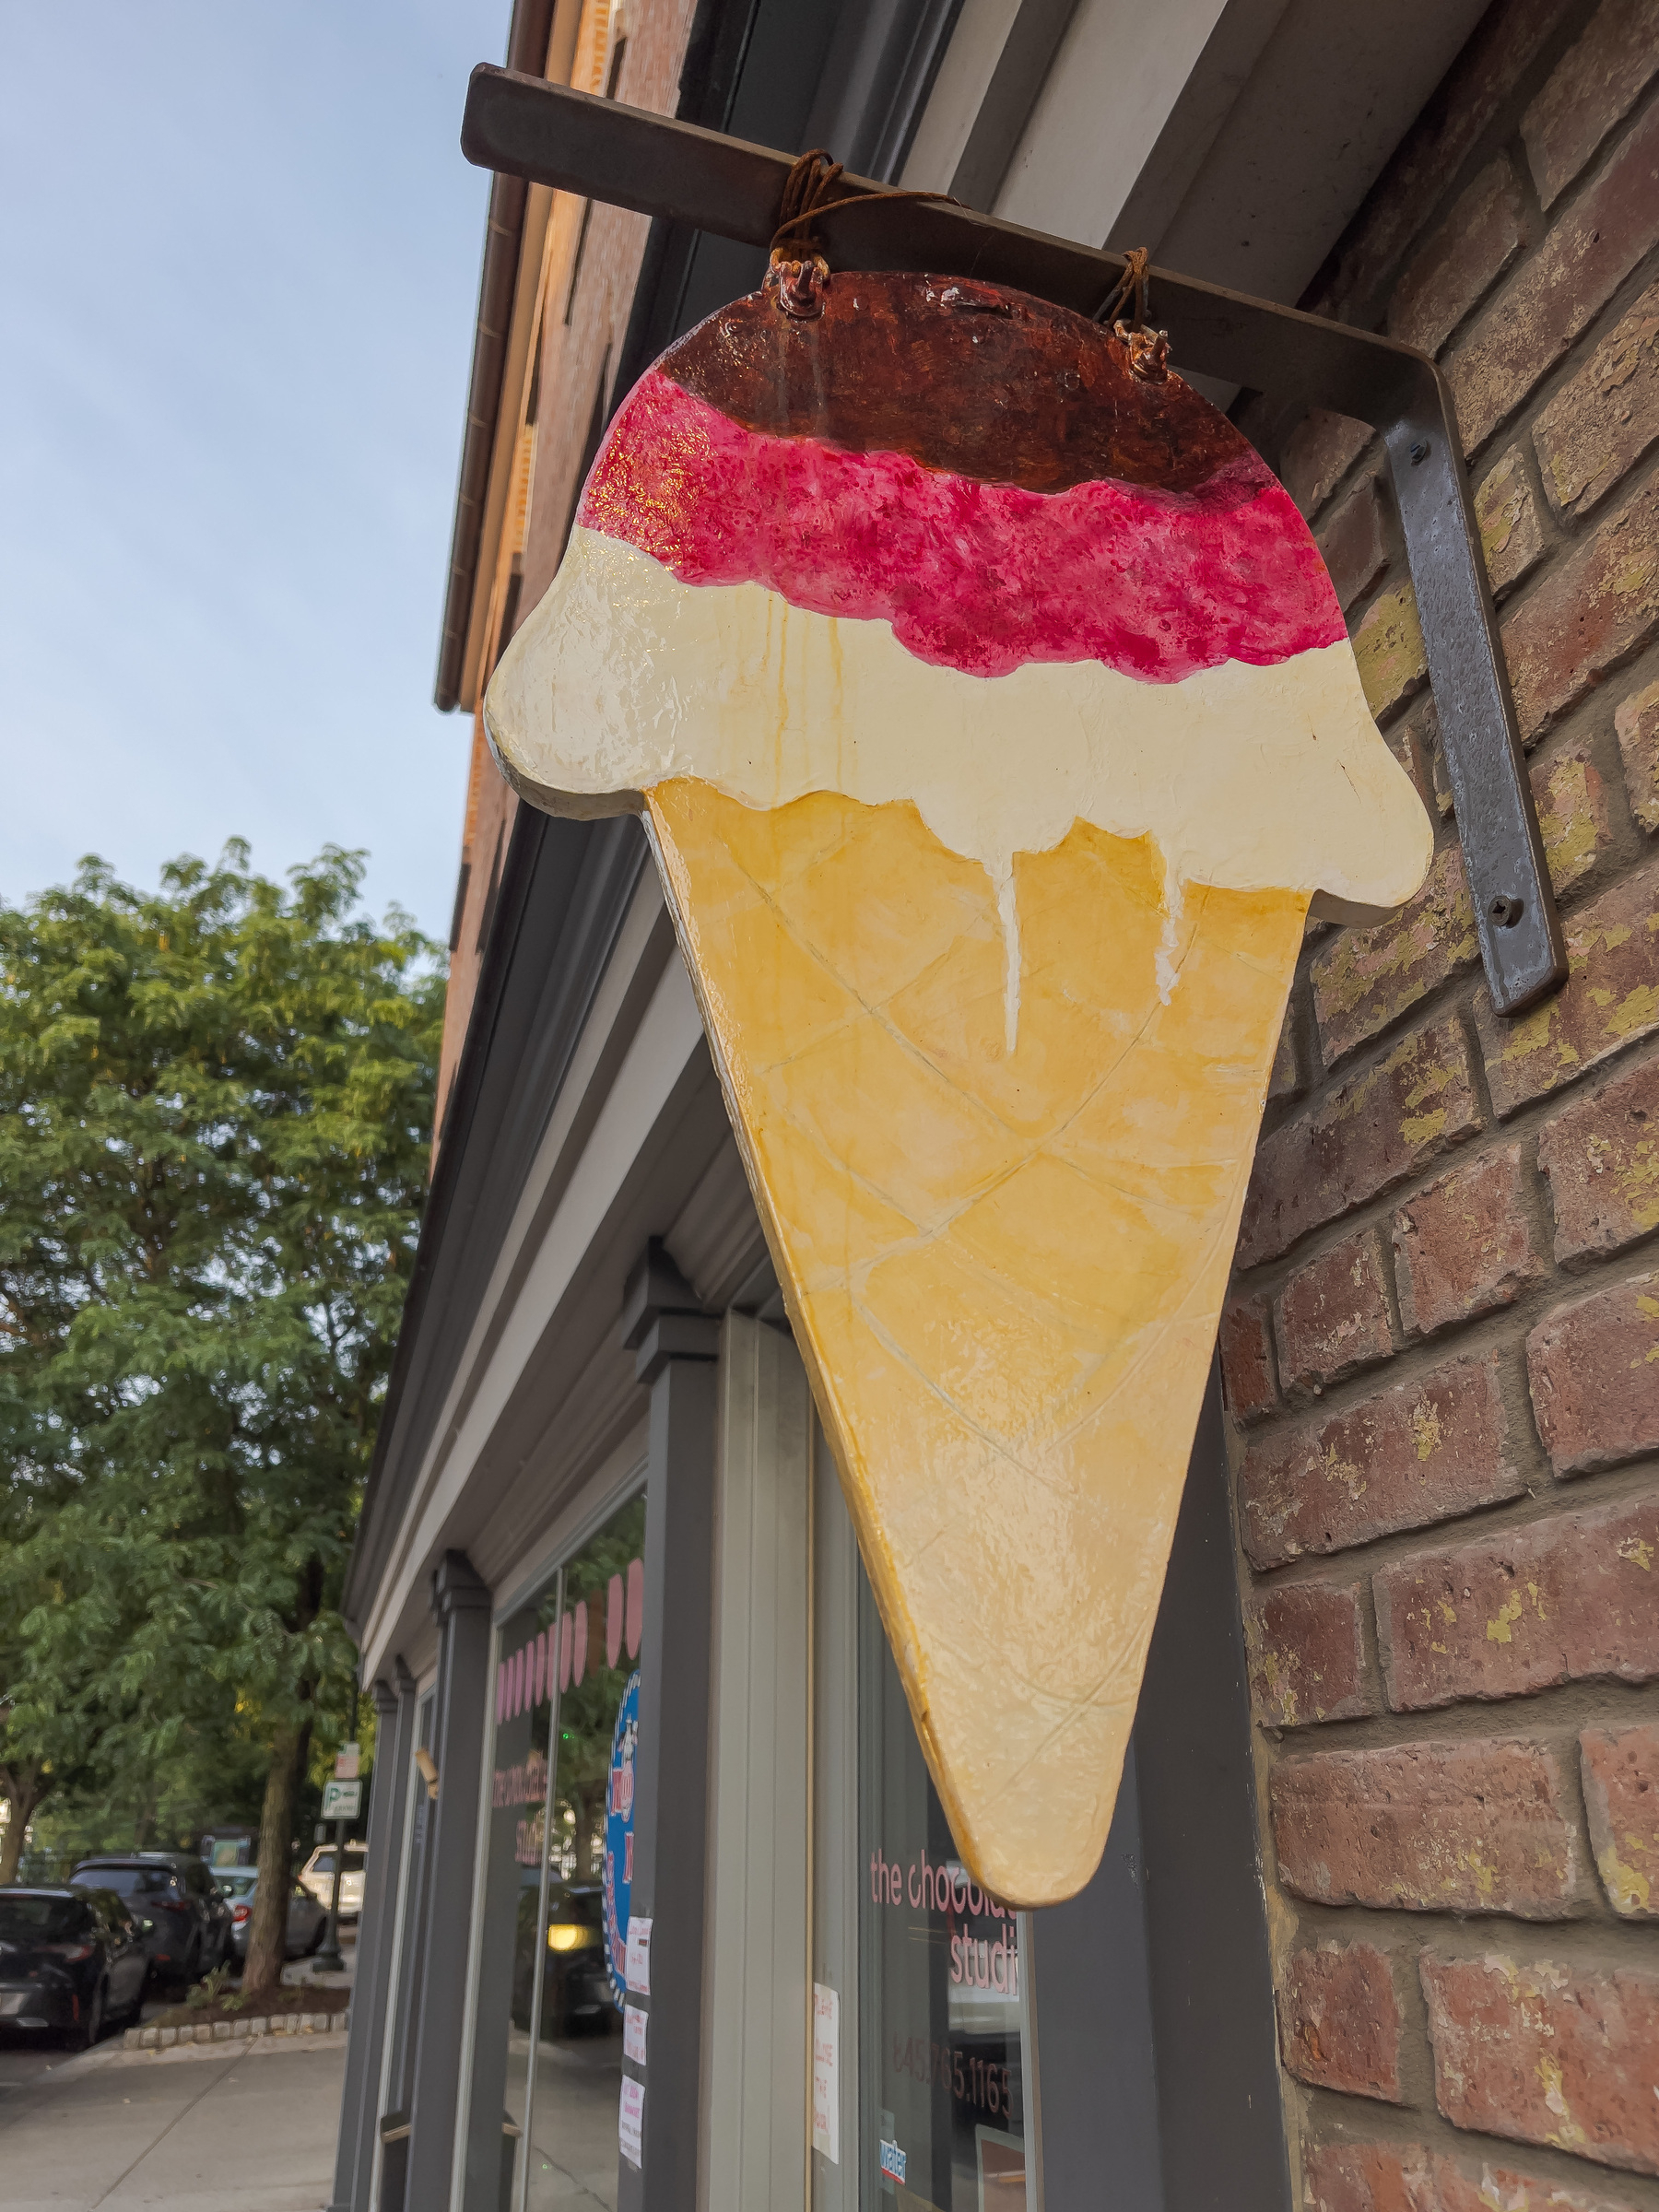 ice cream shop sign in shape of an ice cream cone